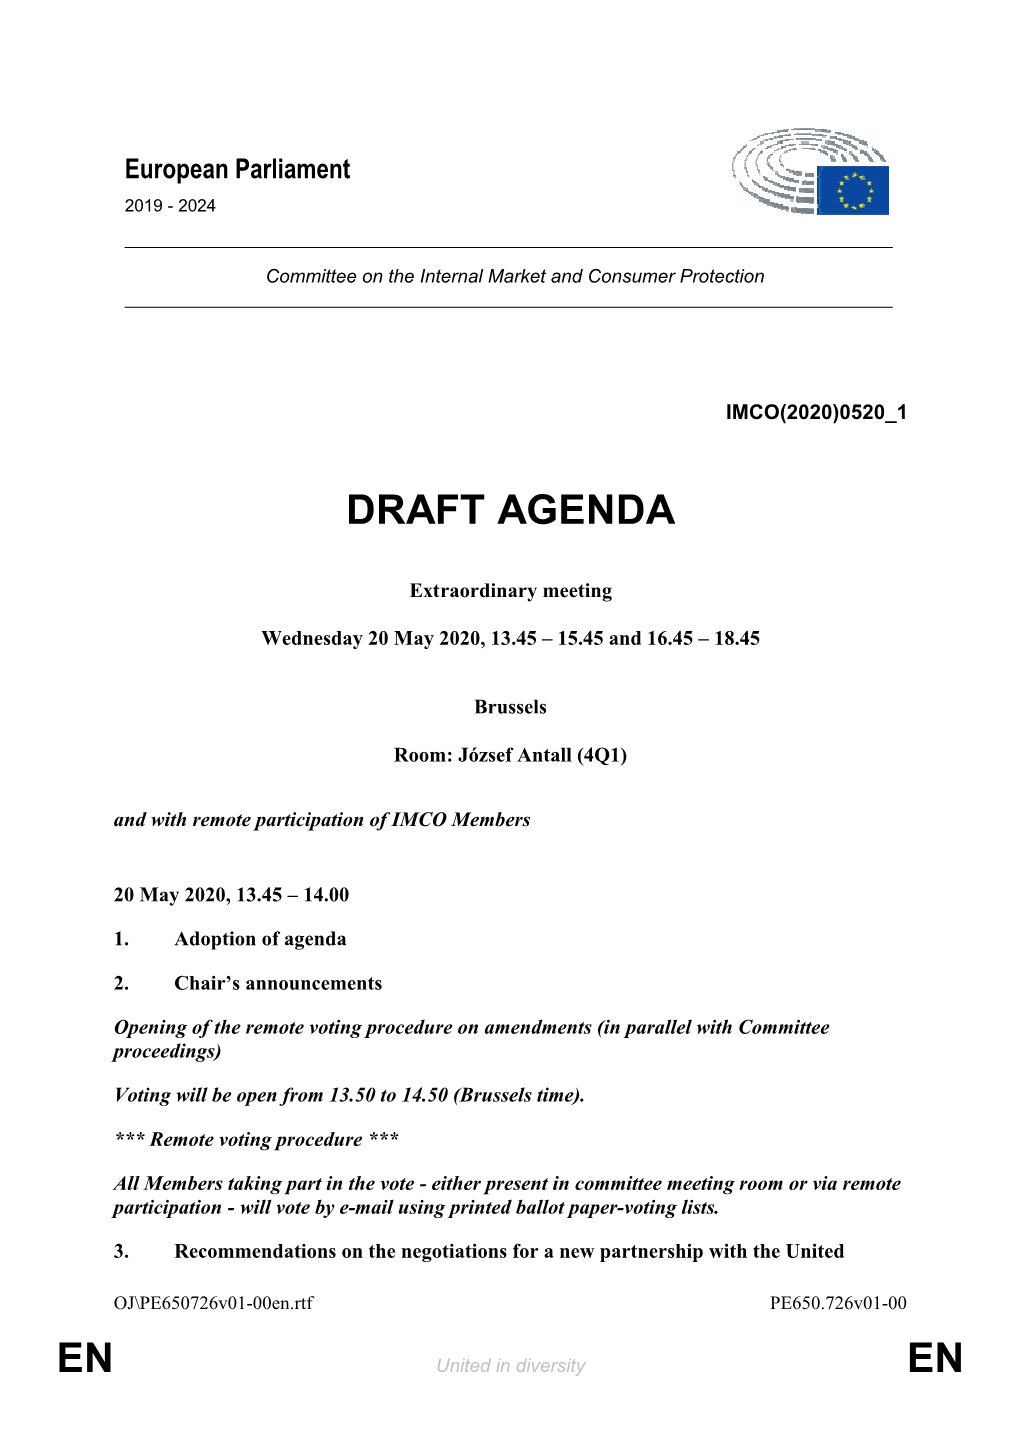 Agenda of the Committee Meeting on 20 May 2020